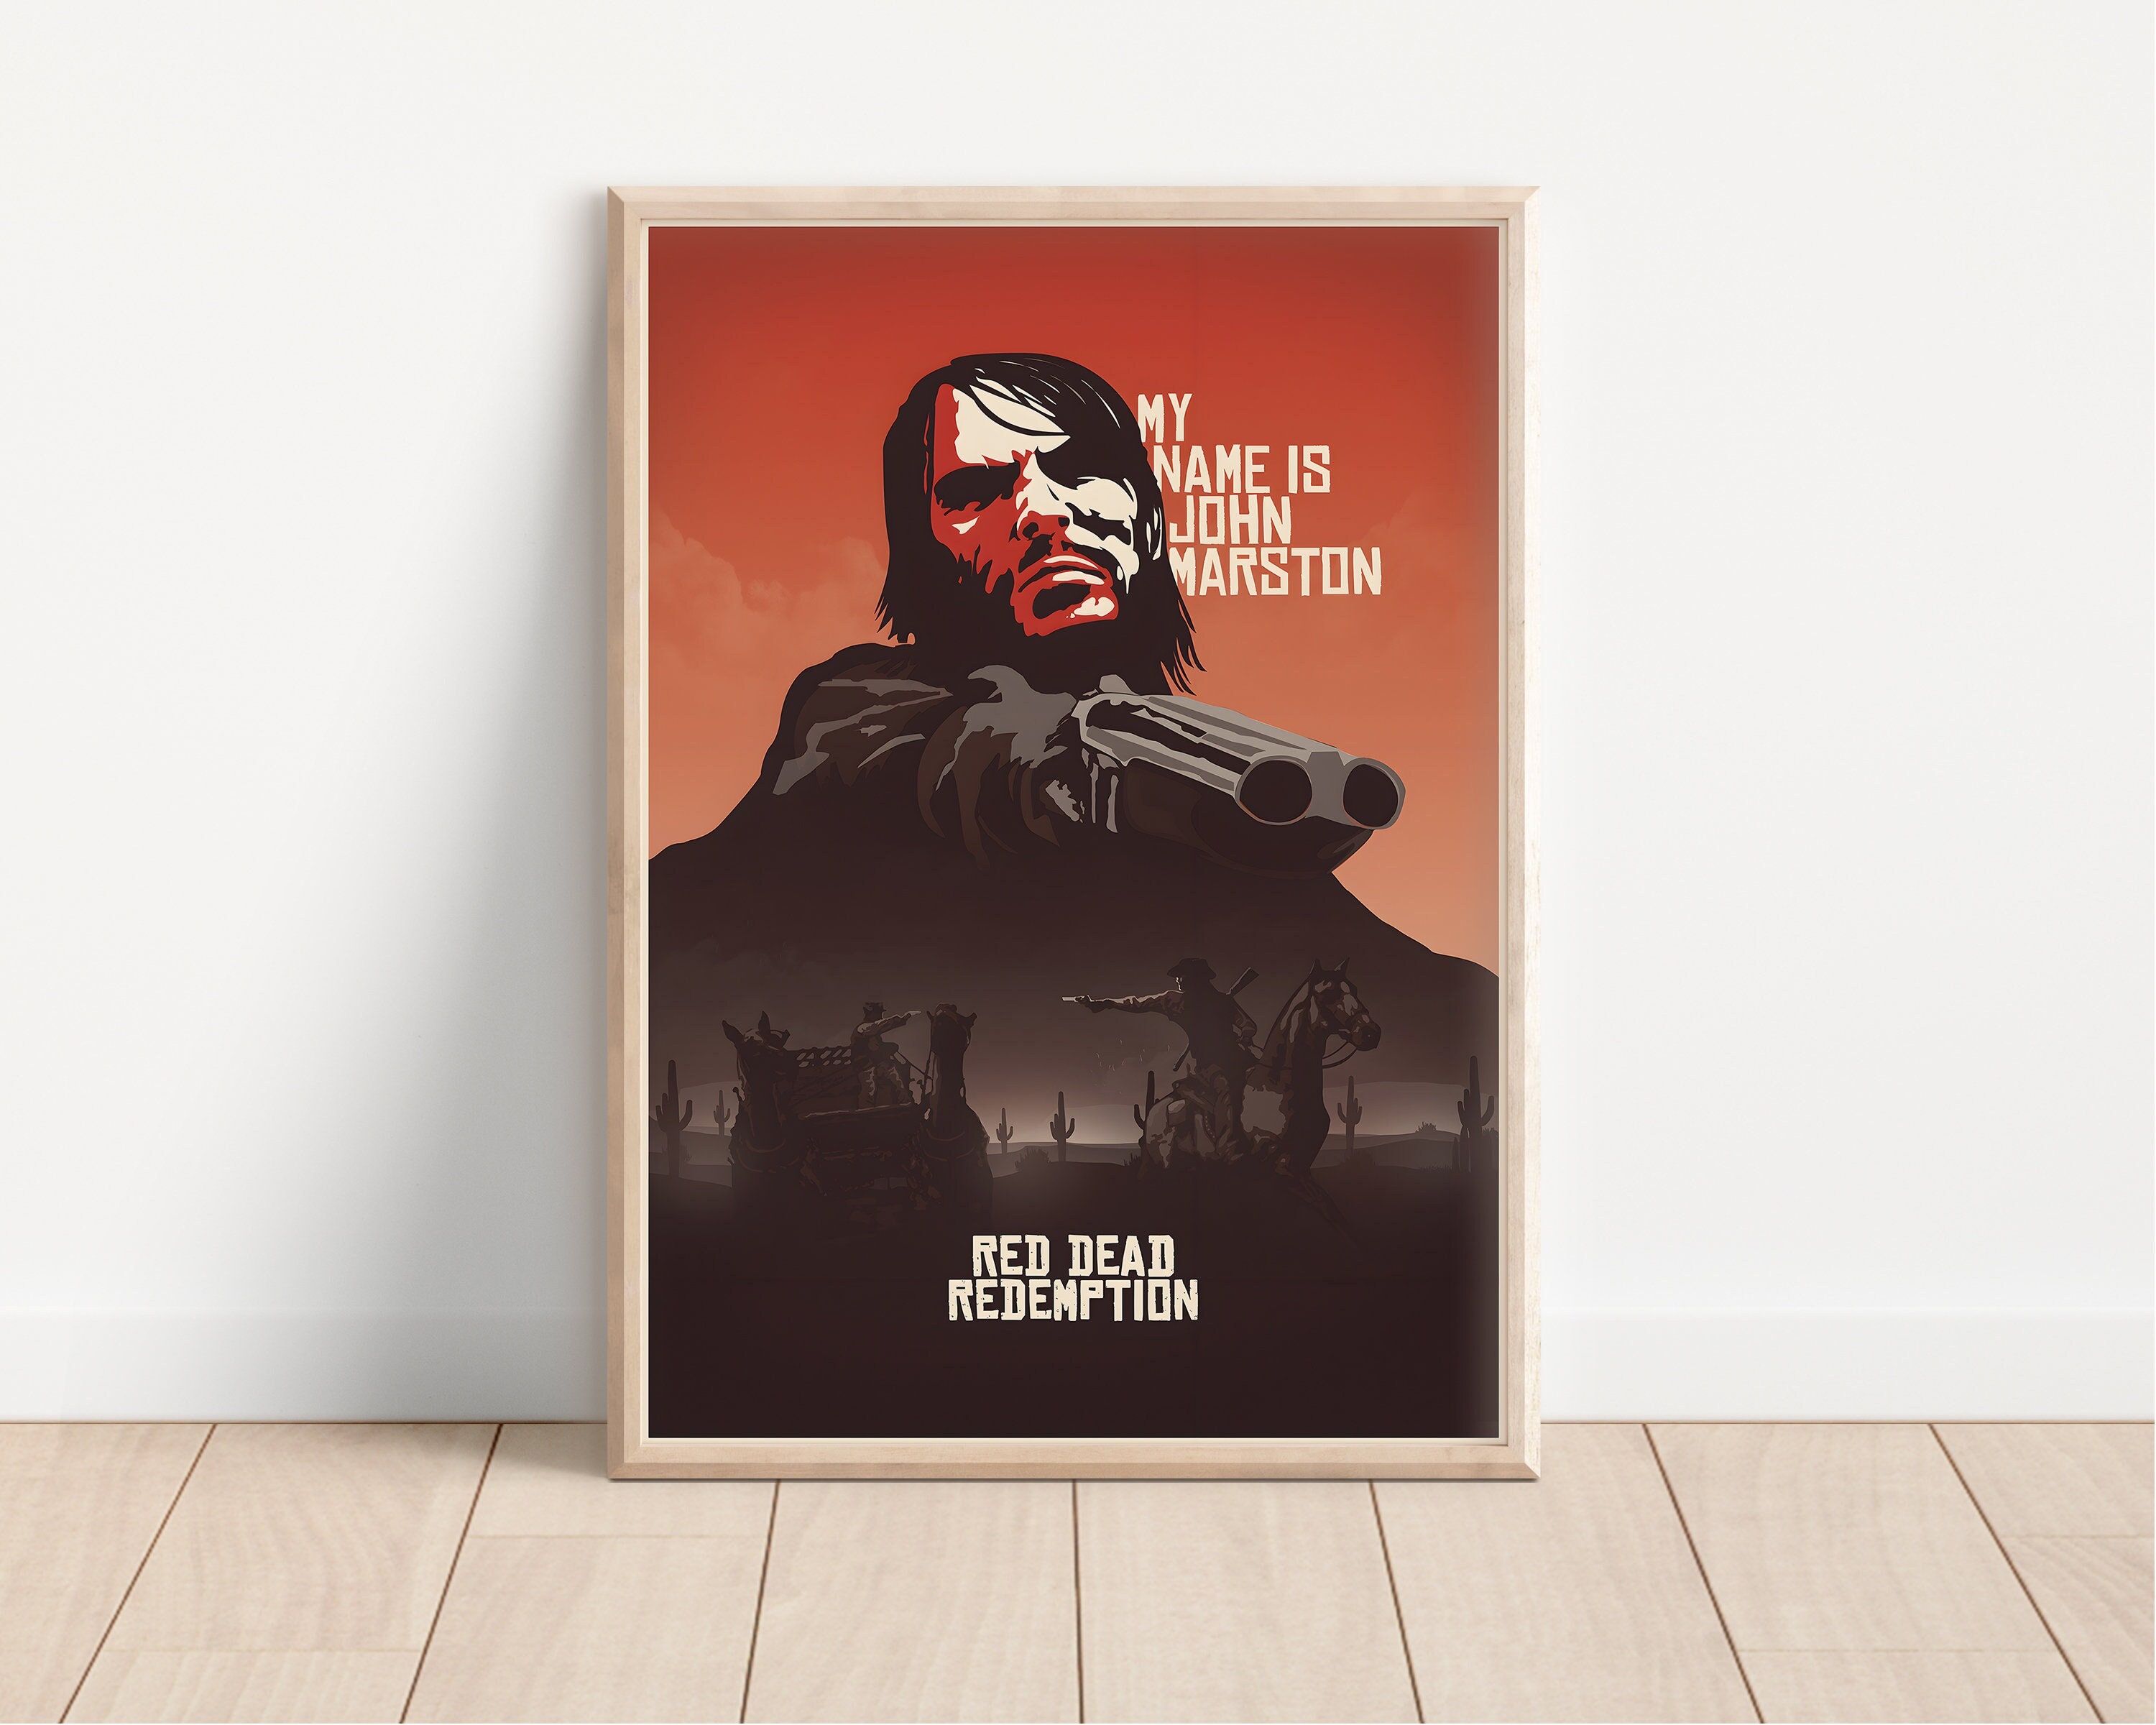 Red Dead Redemption 2 Poster Designed & Sold By Pelican Anastasia Amaranth